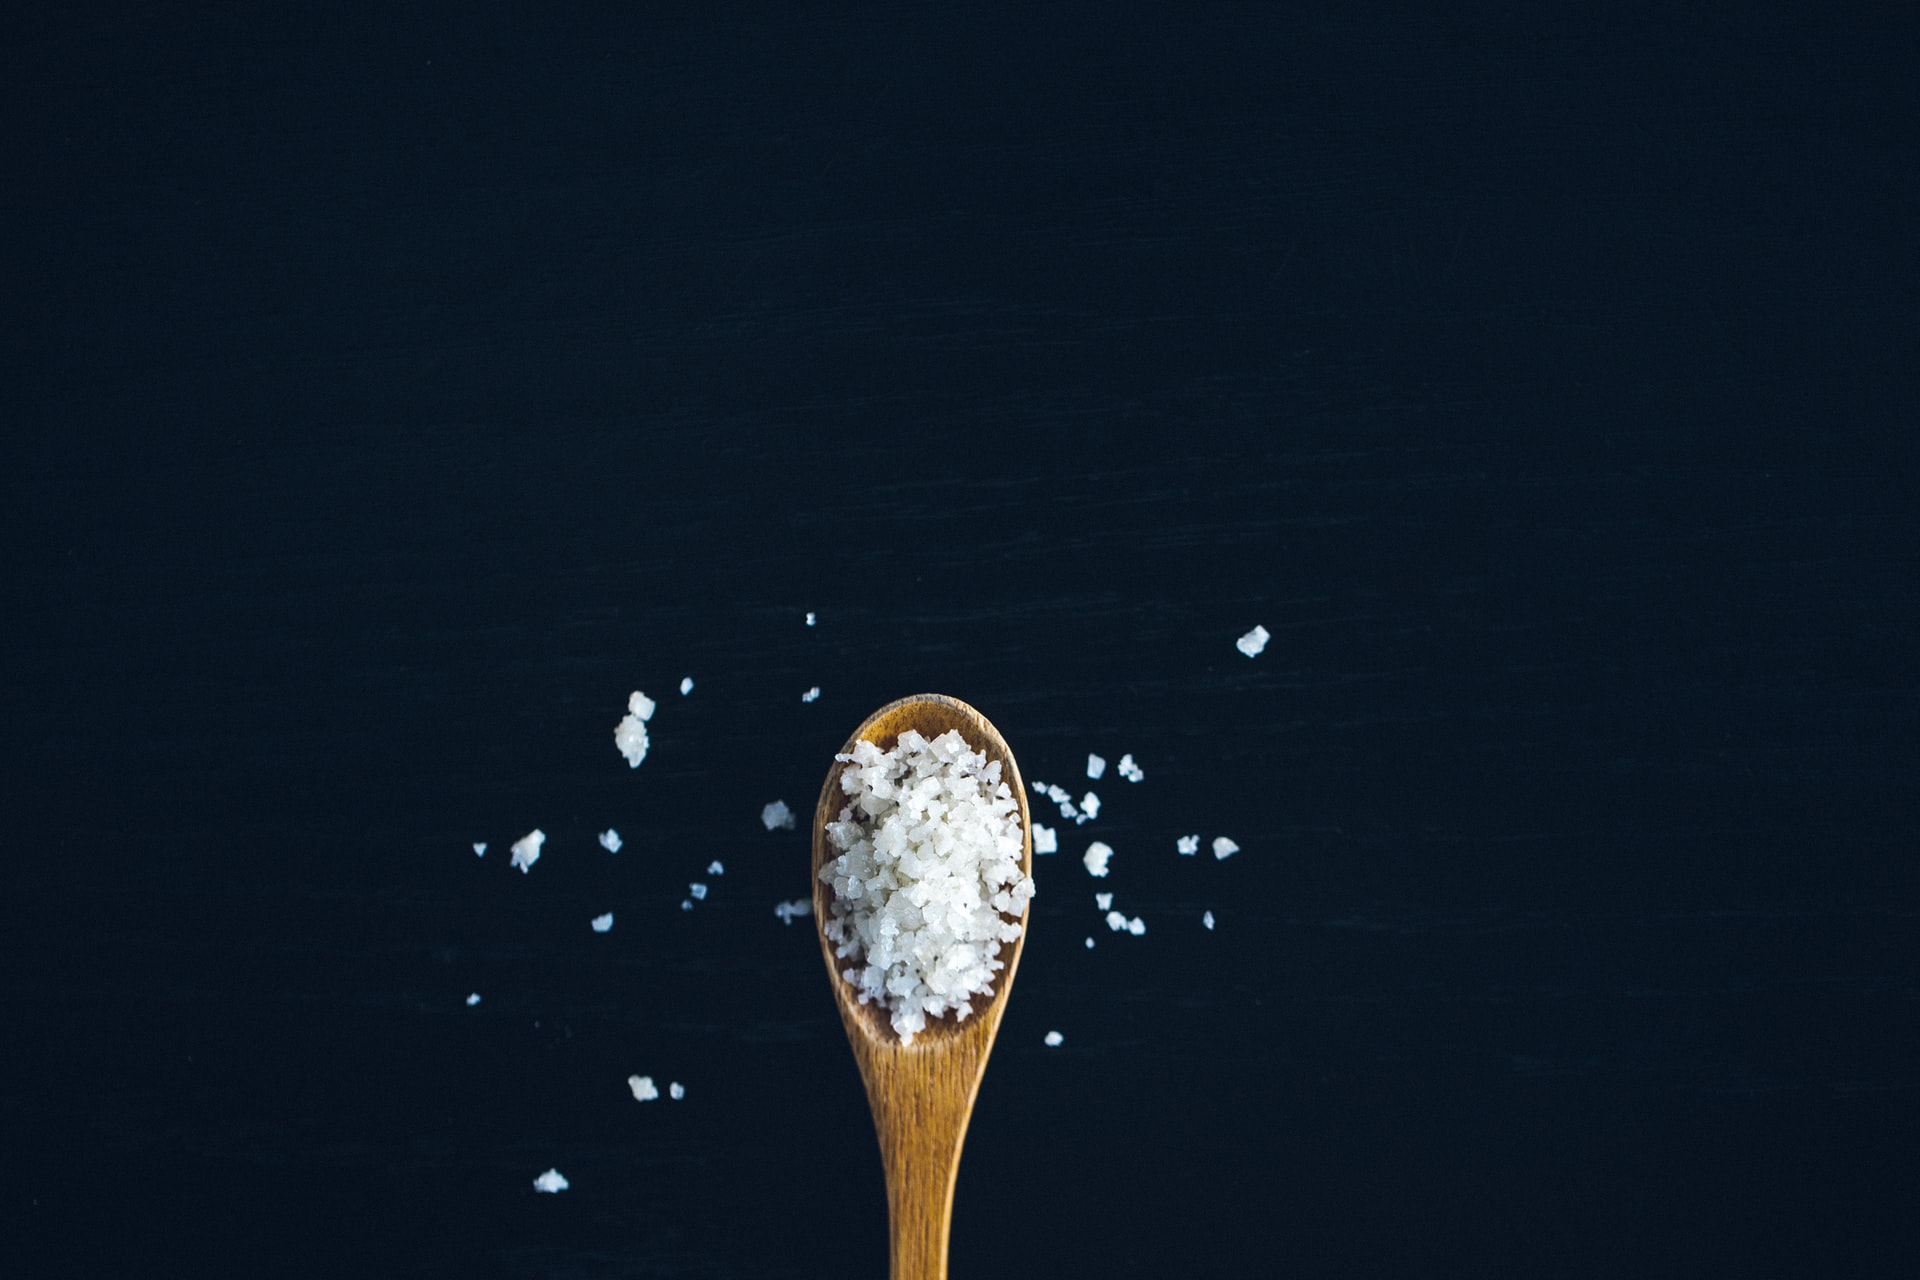 Wooden spoon loaded with salt